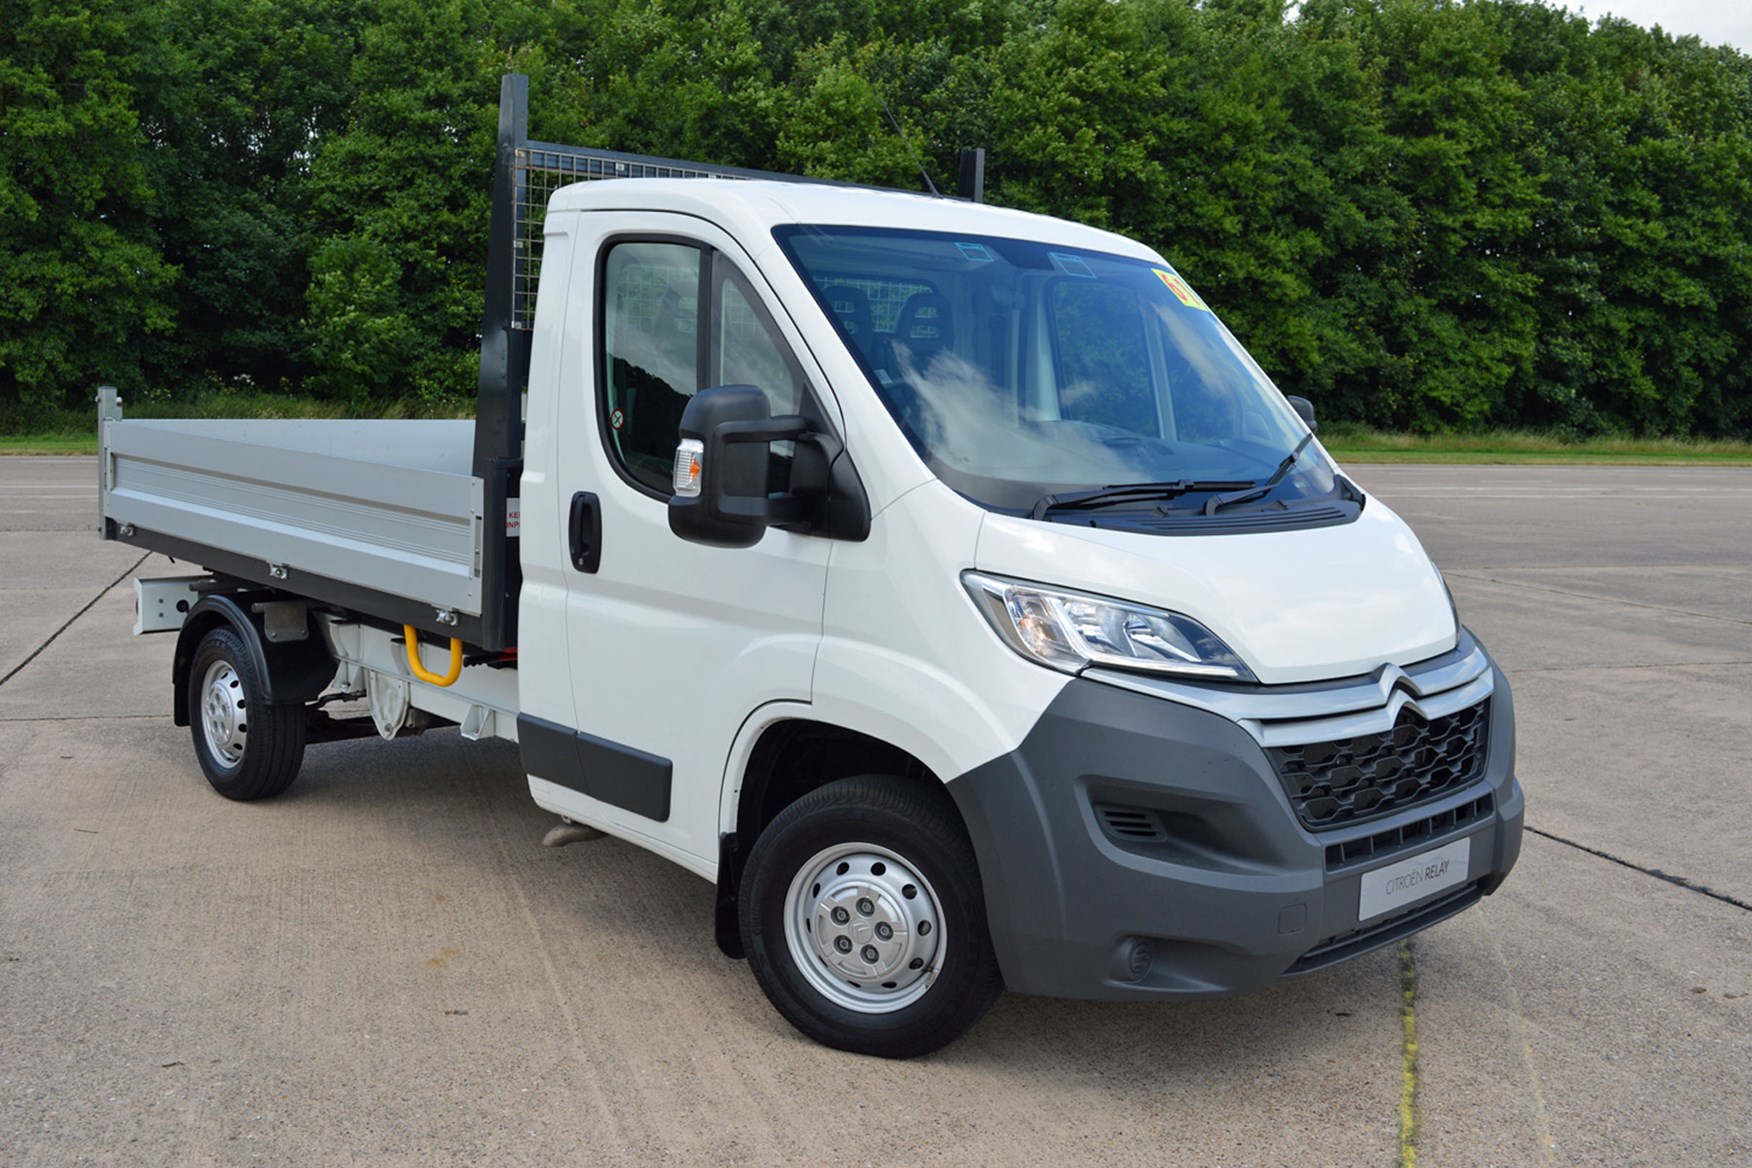 Citroen Relay 2.2 HDi Tipper review - front view, white